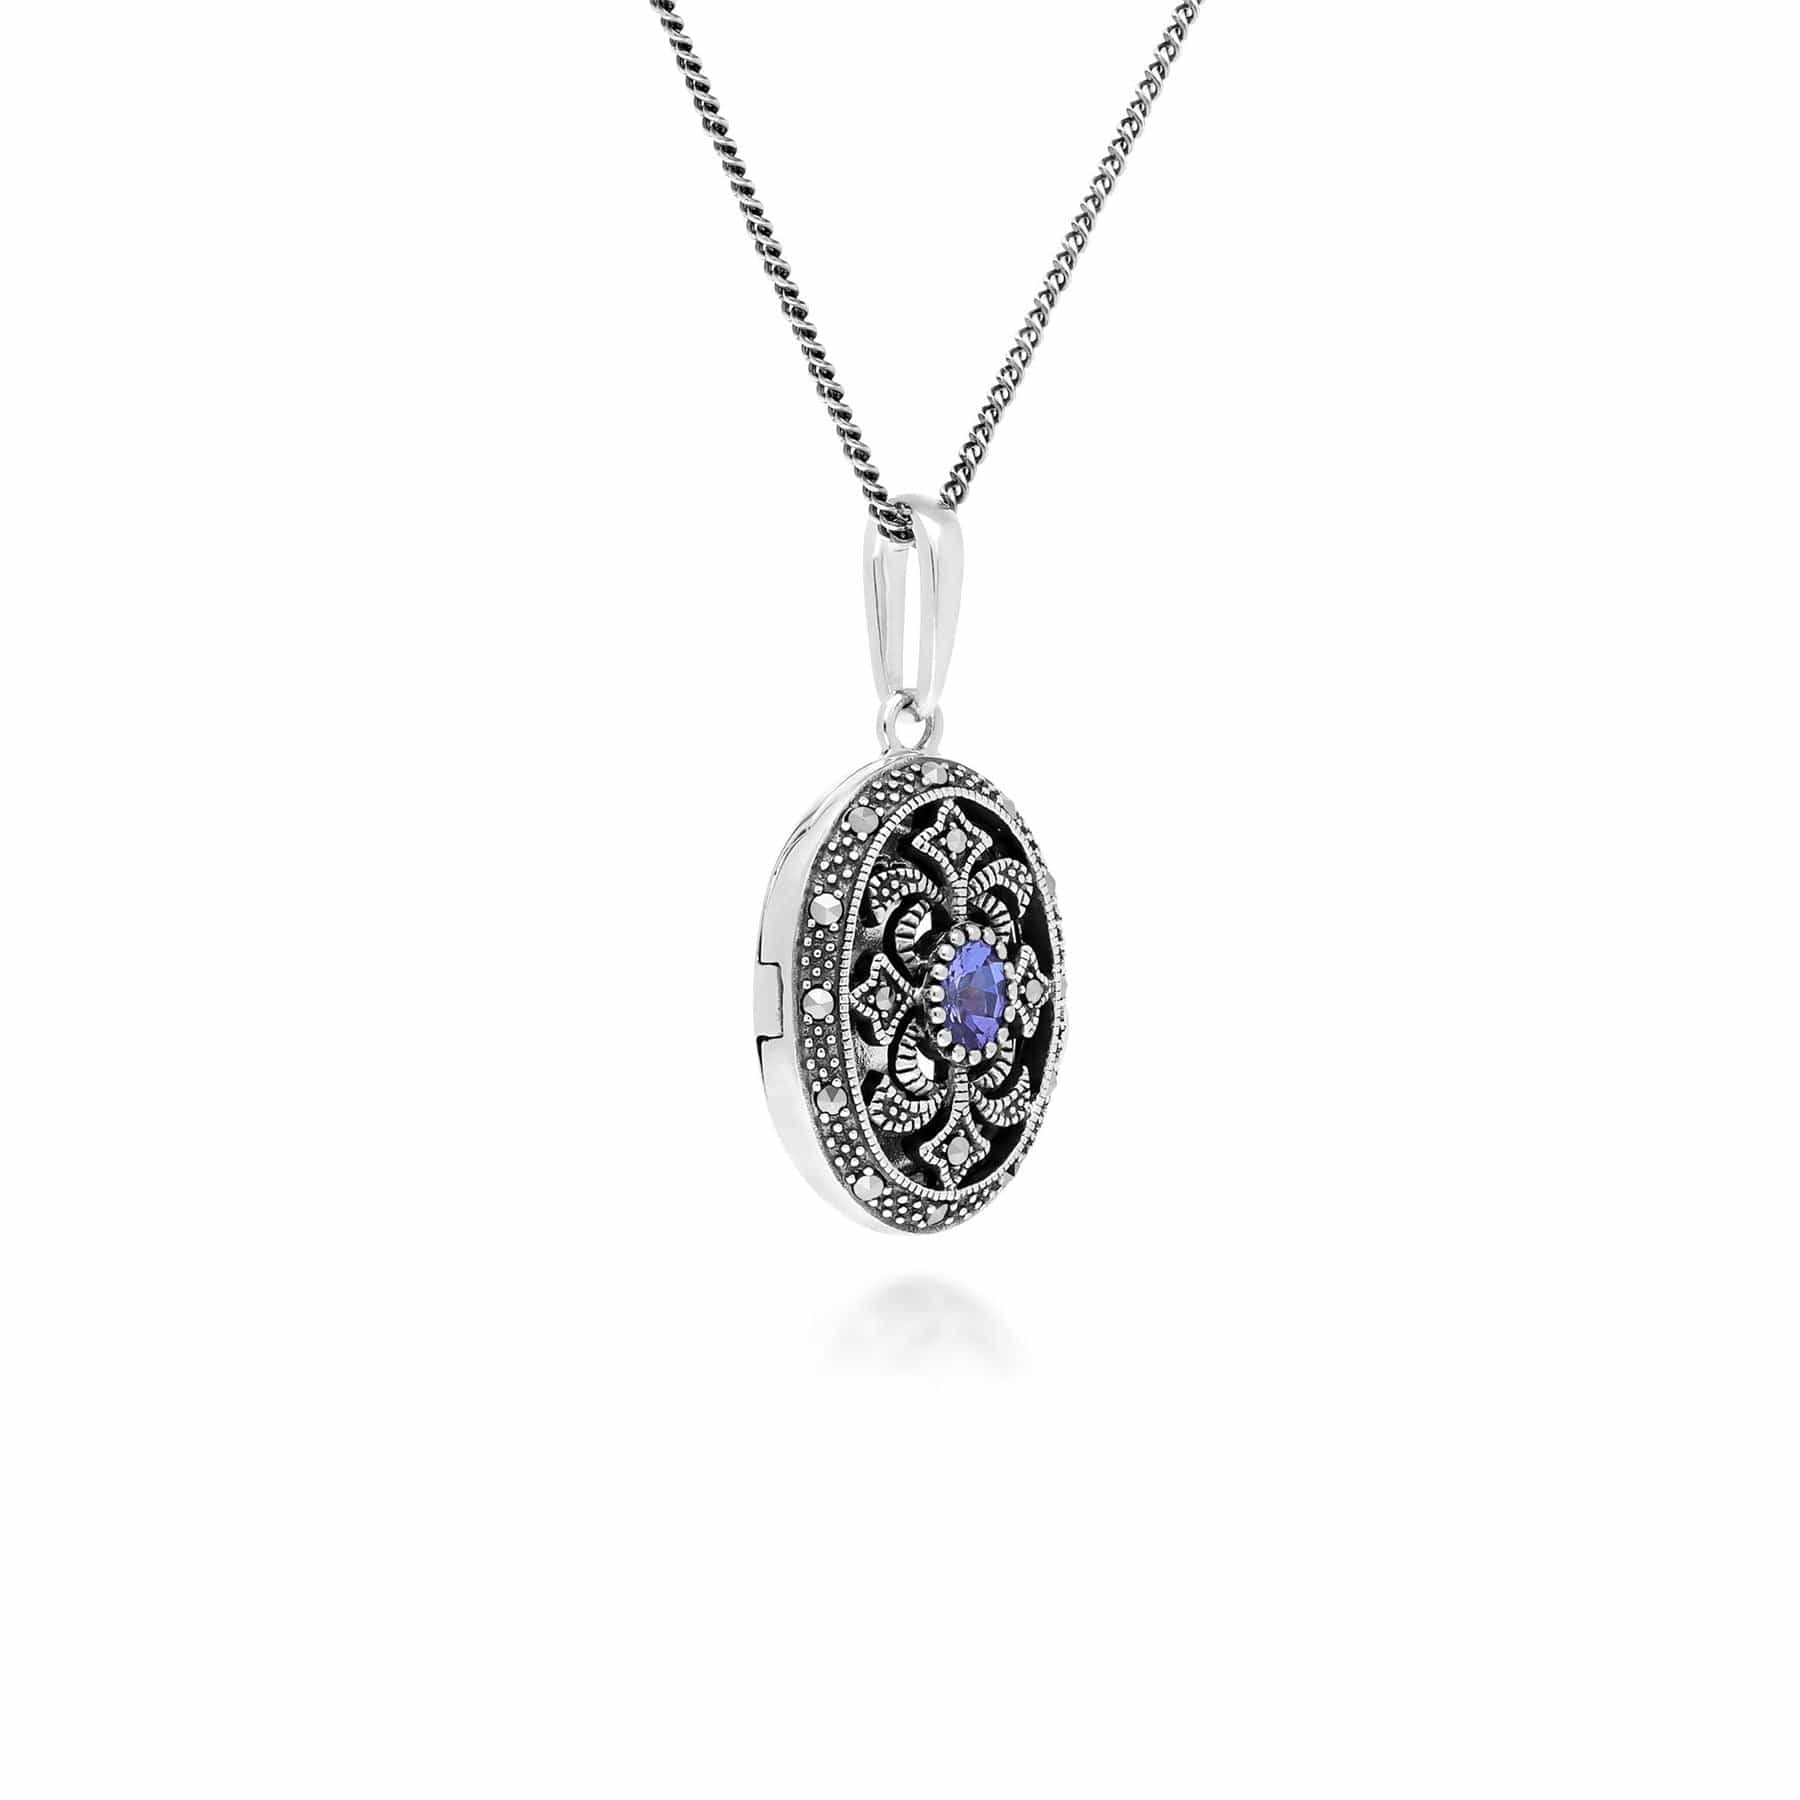 214N716209925 Art Nouveau Style Oval Tanzanite & Marcasite Locket Necklace in 925 Sterling Silver 2